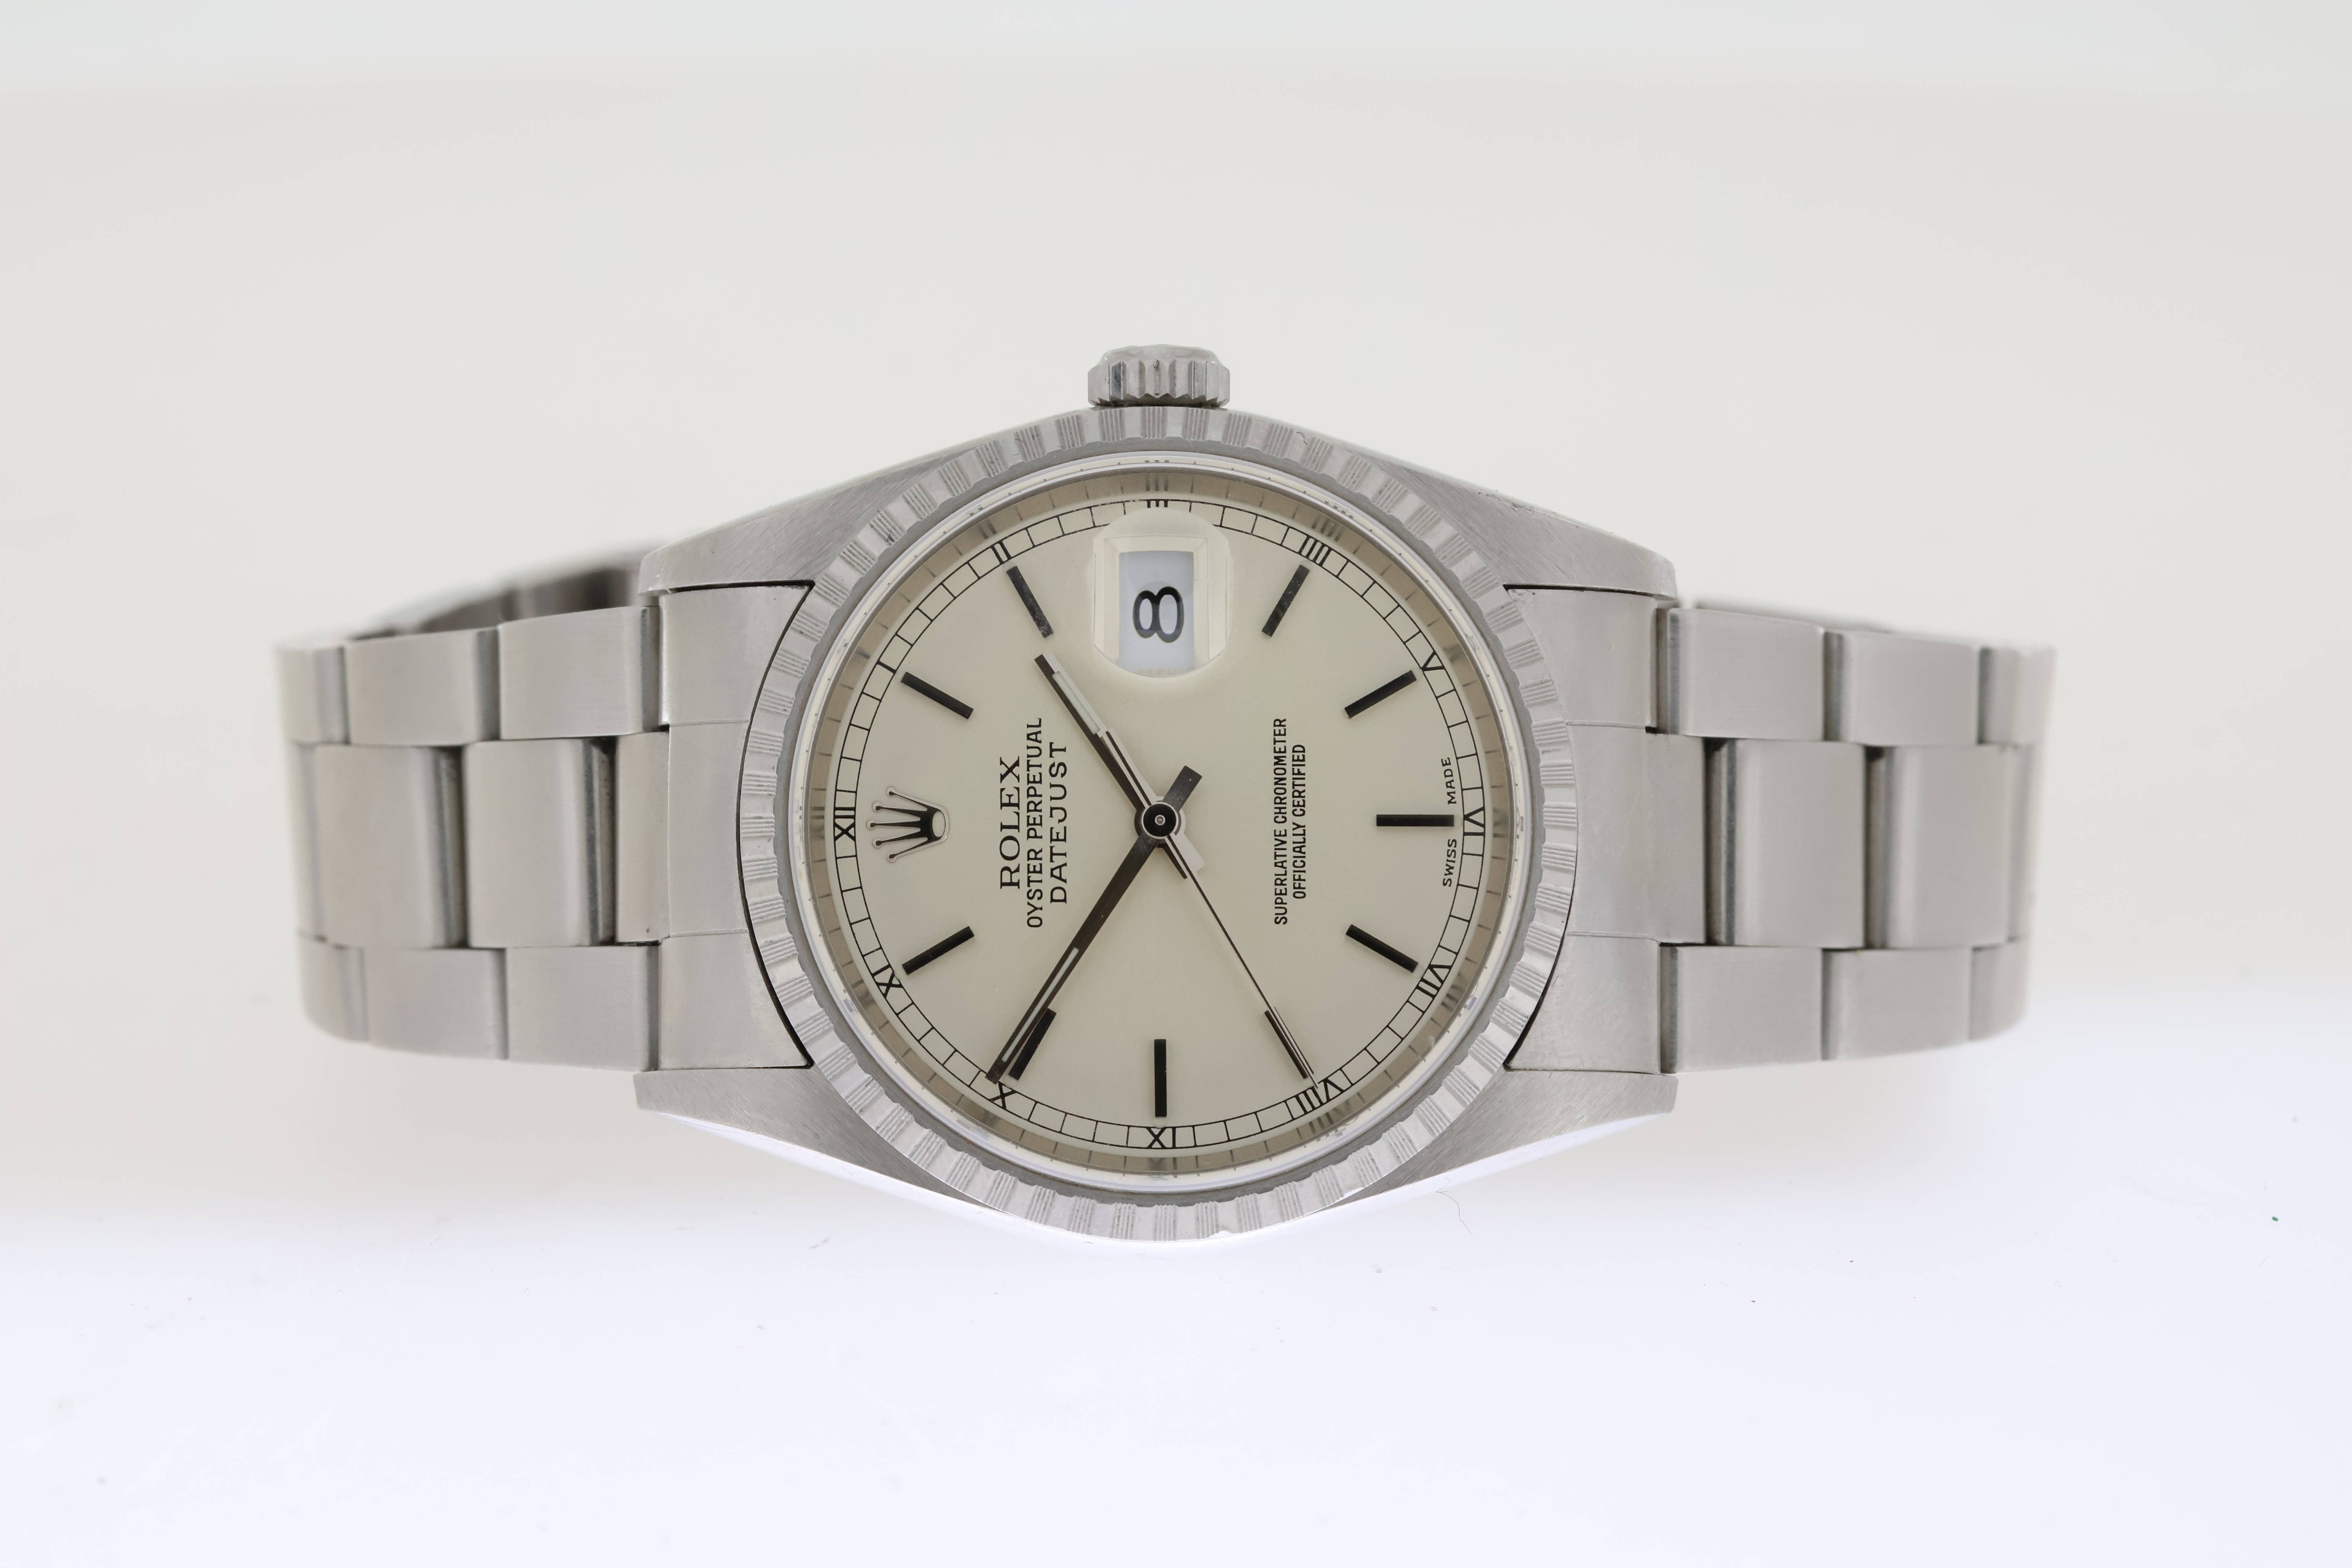 ROLEX DATEJUST 36 REFERENCE 16220 BOX AND PAPERS 2006 - Image 2 of 6